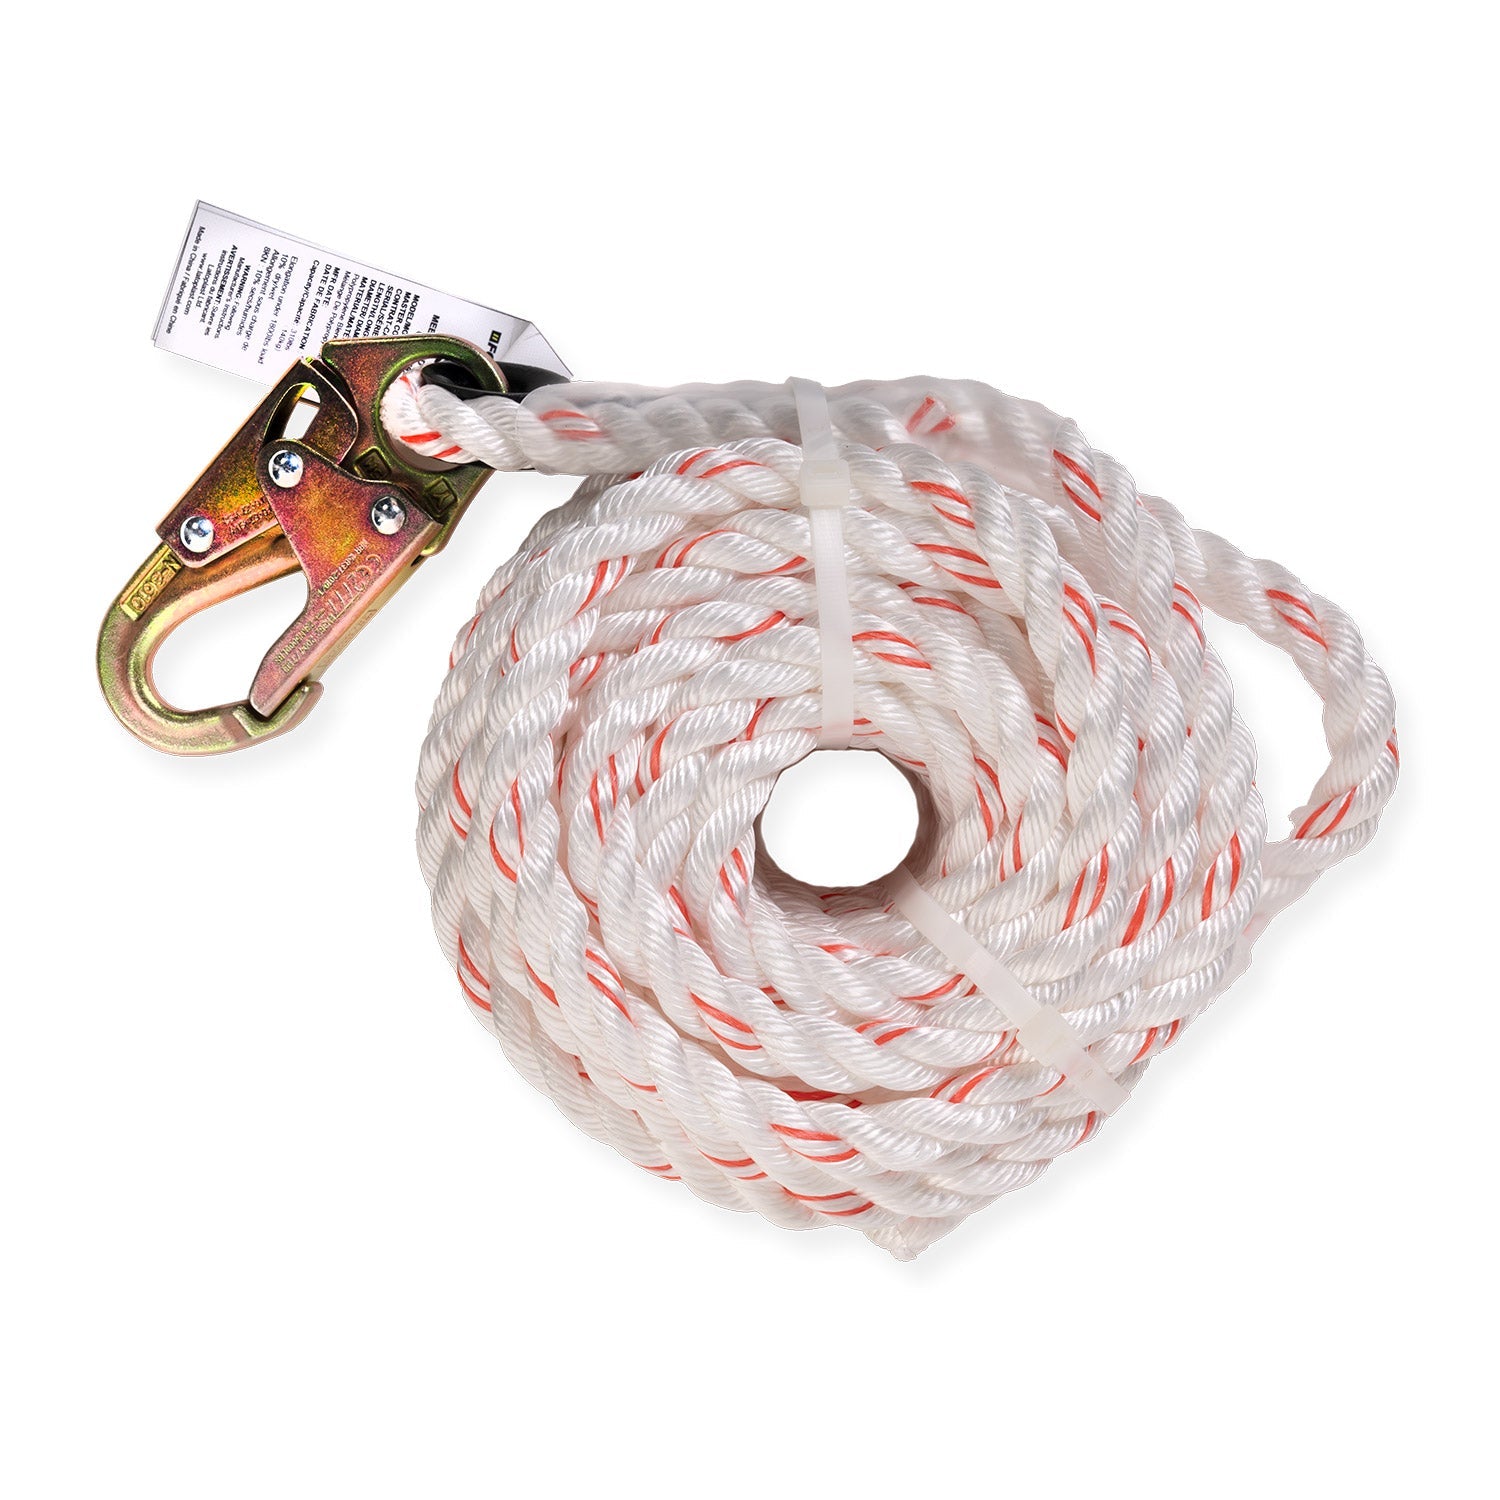 Rope Grab With Attached 2' Shock Absorbing Lanyard